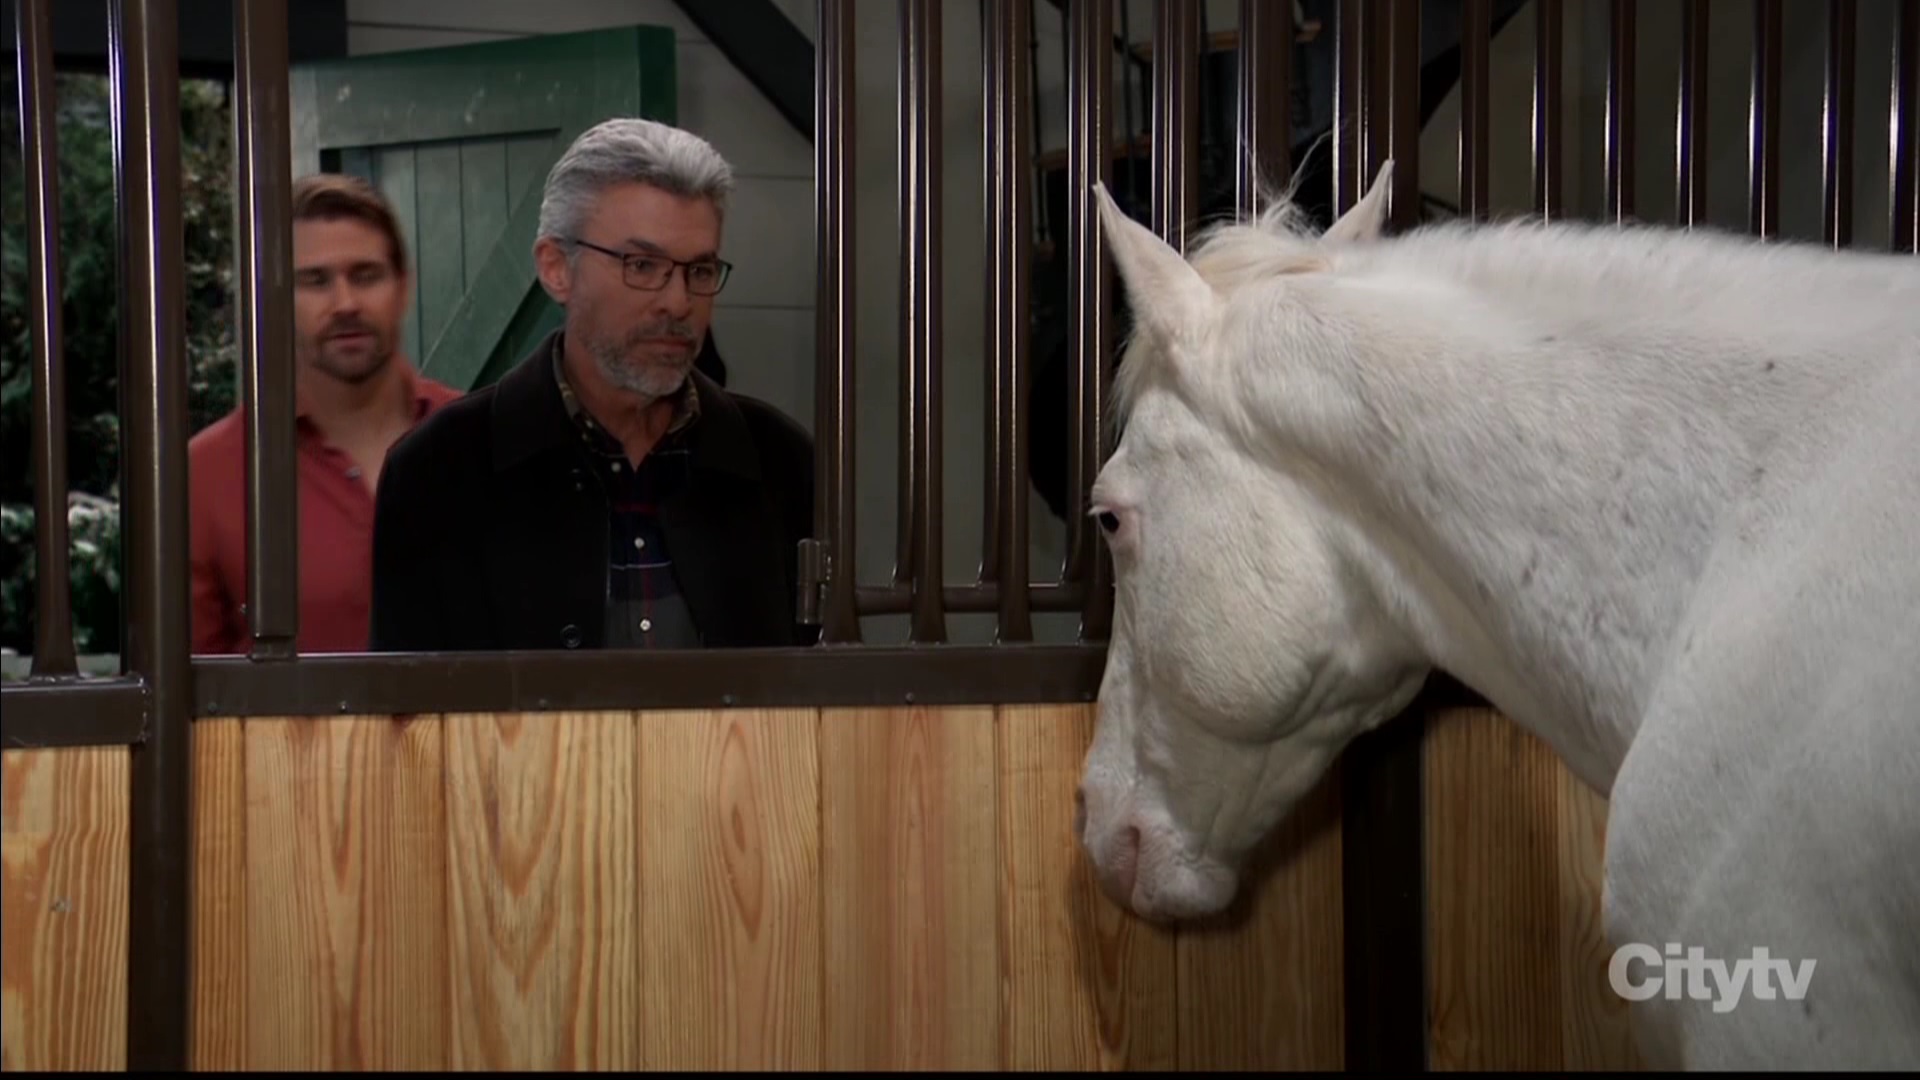 mac, his son and comet the horse GH recaps